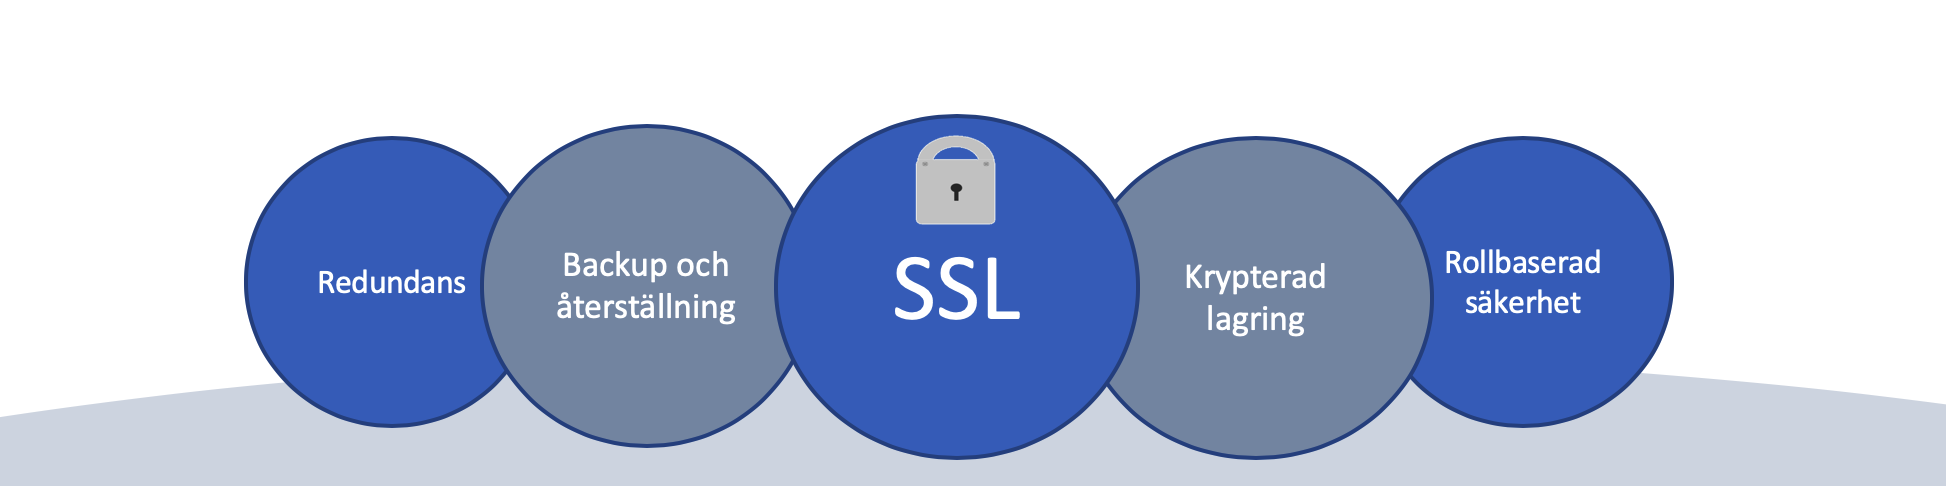 Security aspects for a customer portal